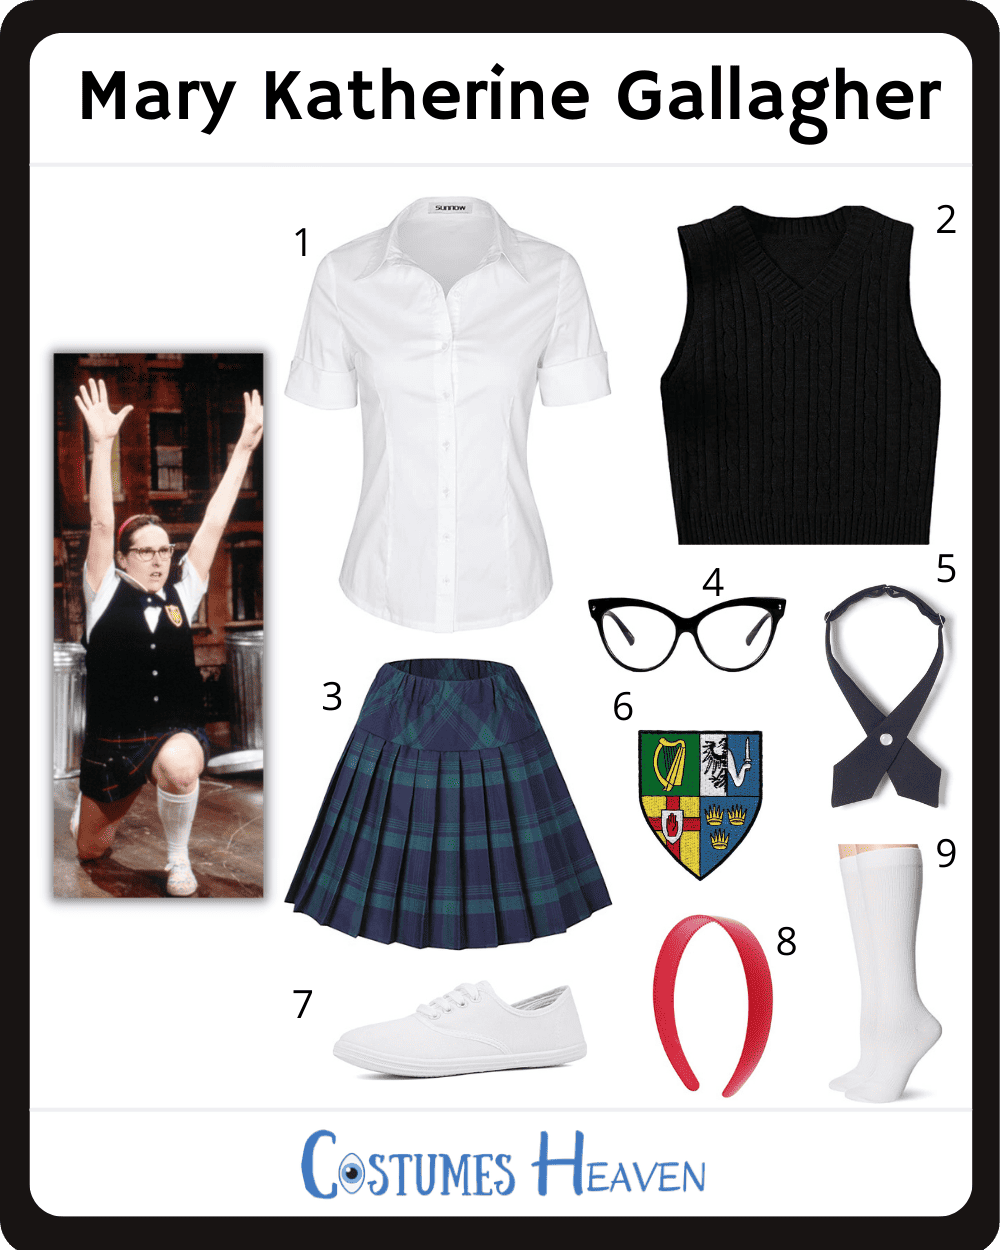 Mary Katherine Gallagher costume.